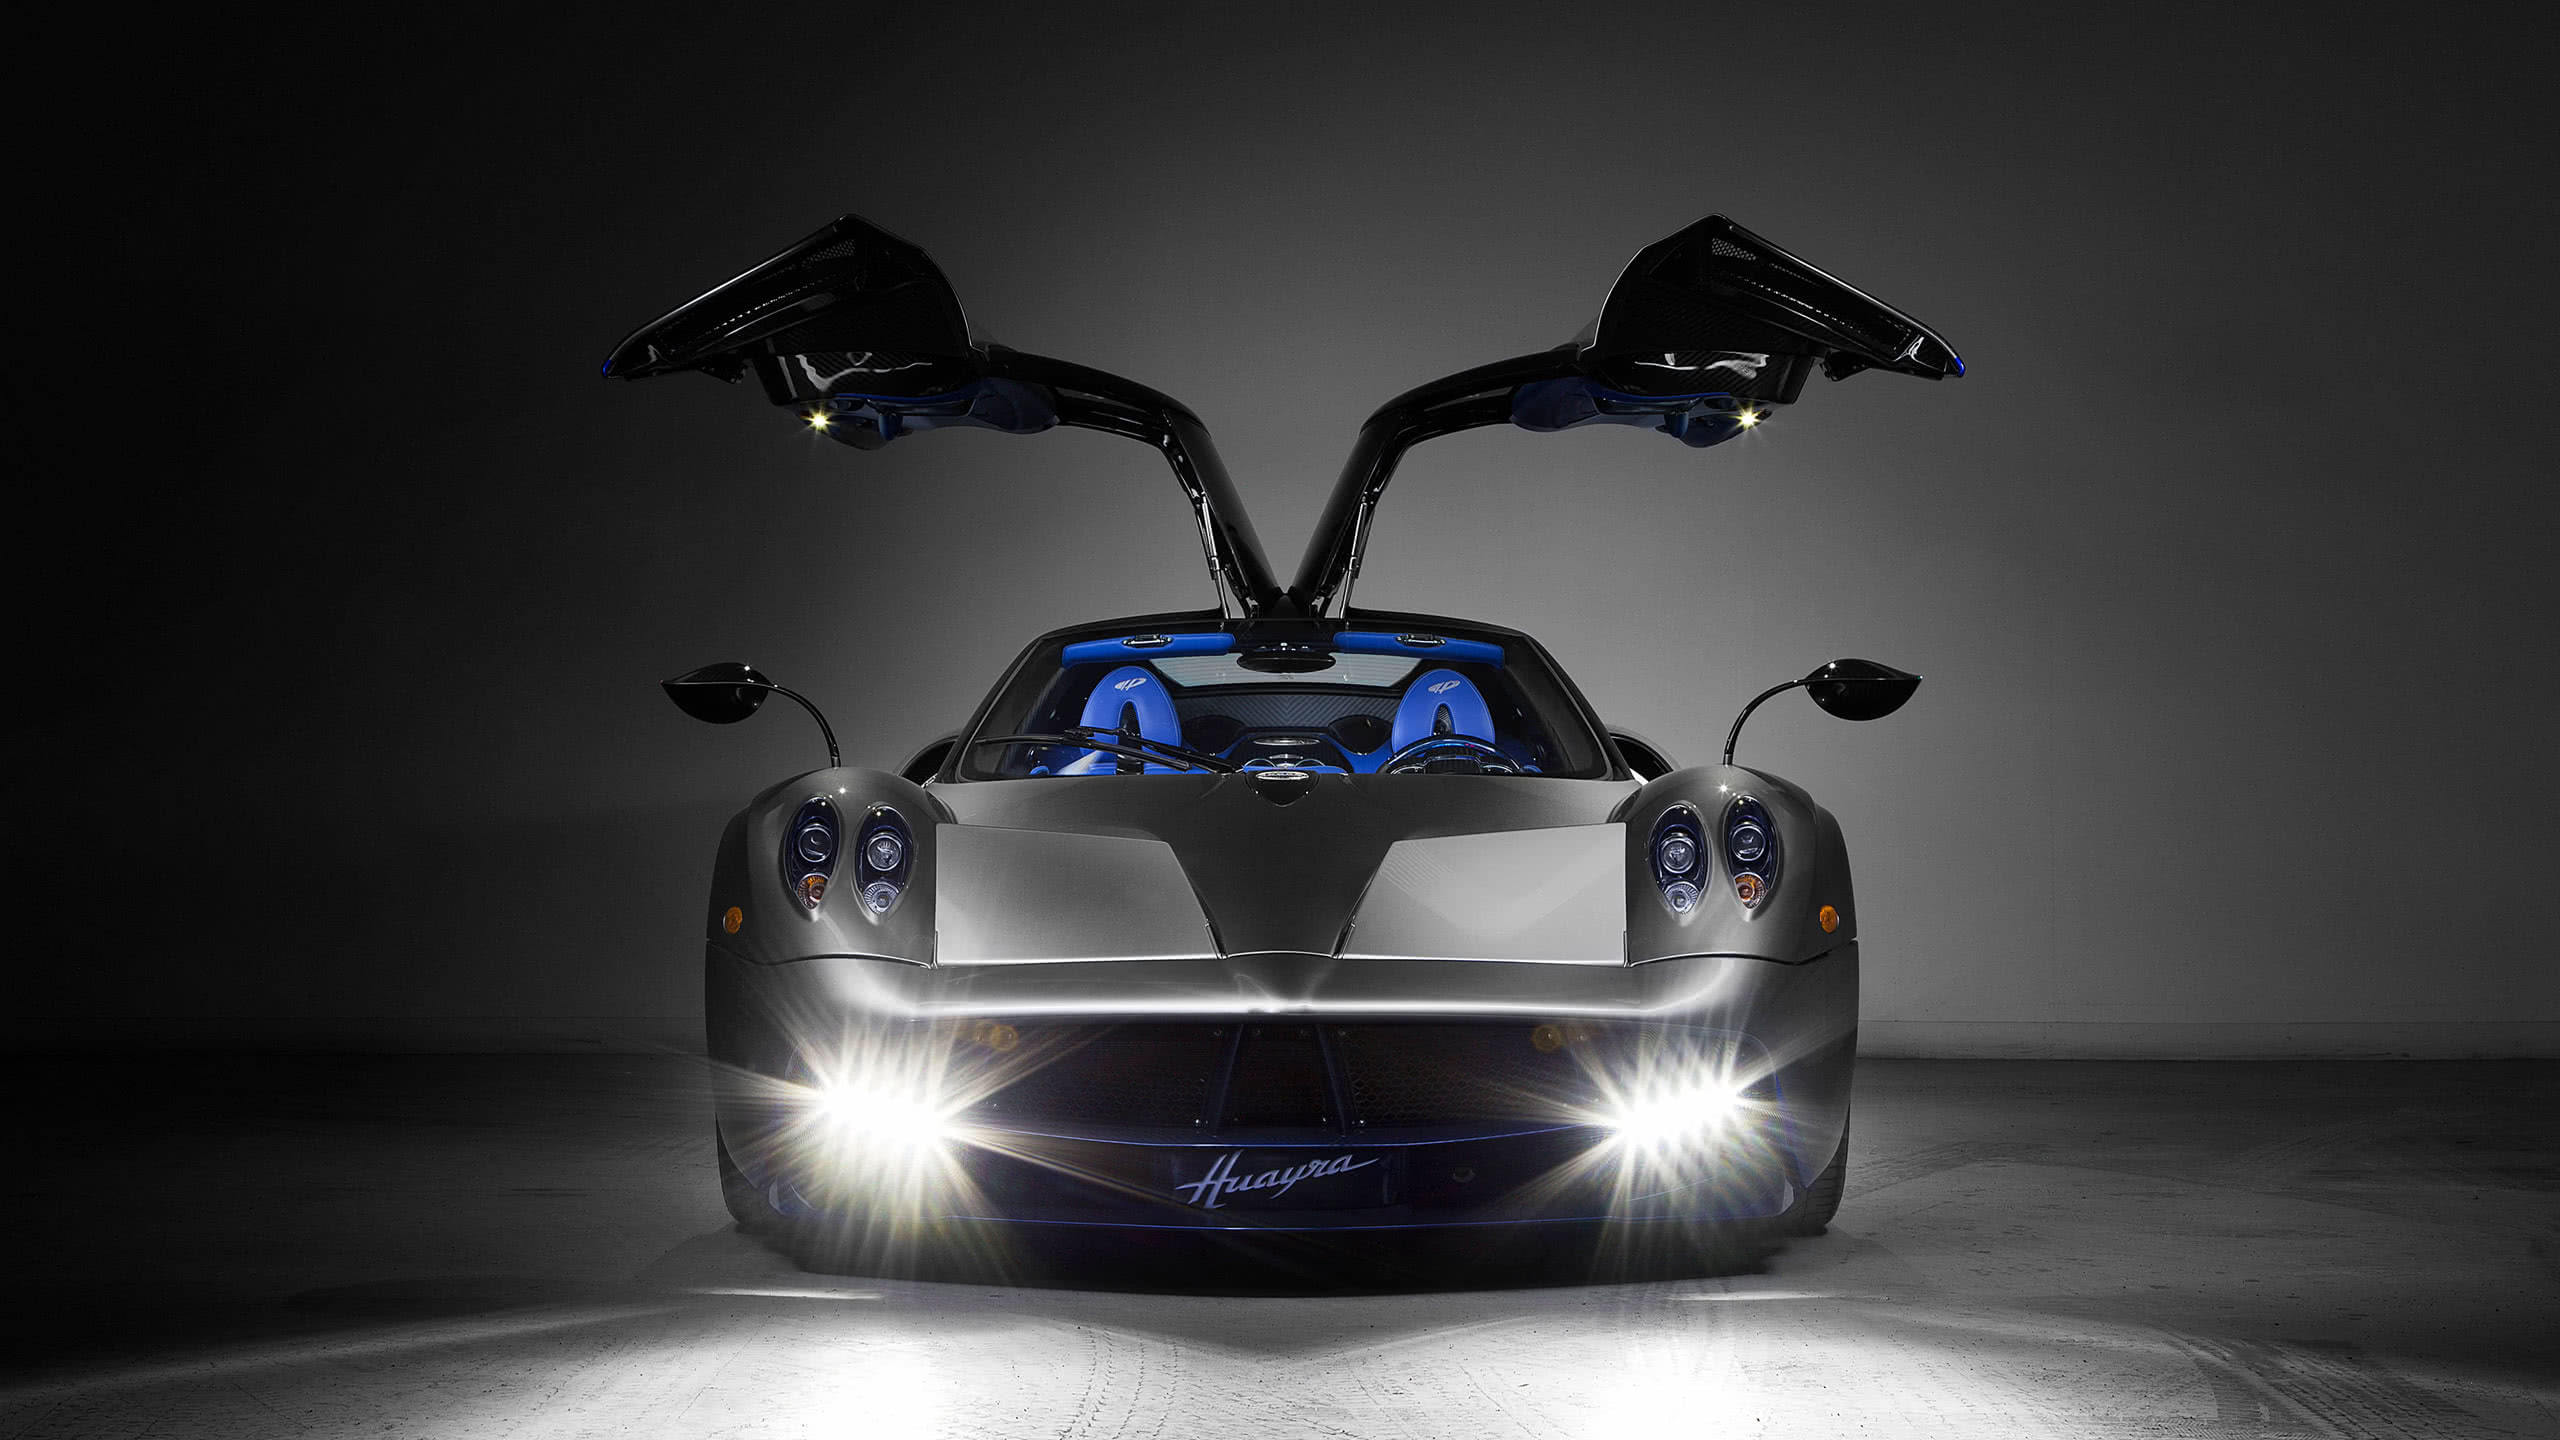 Download wallpaper 1350x2400 pagani huayra car sports car blue carbon  iphone 876s6 for parallax hd background